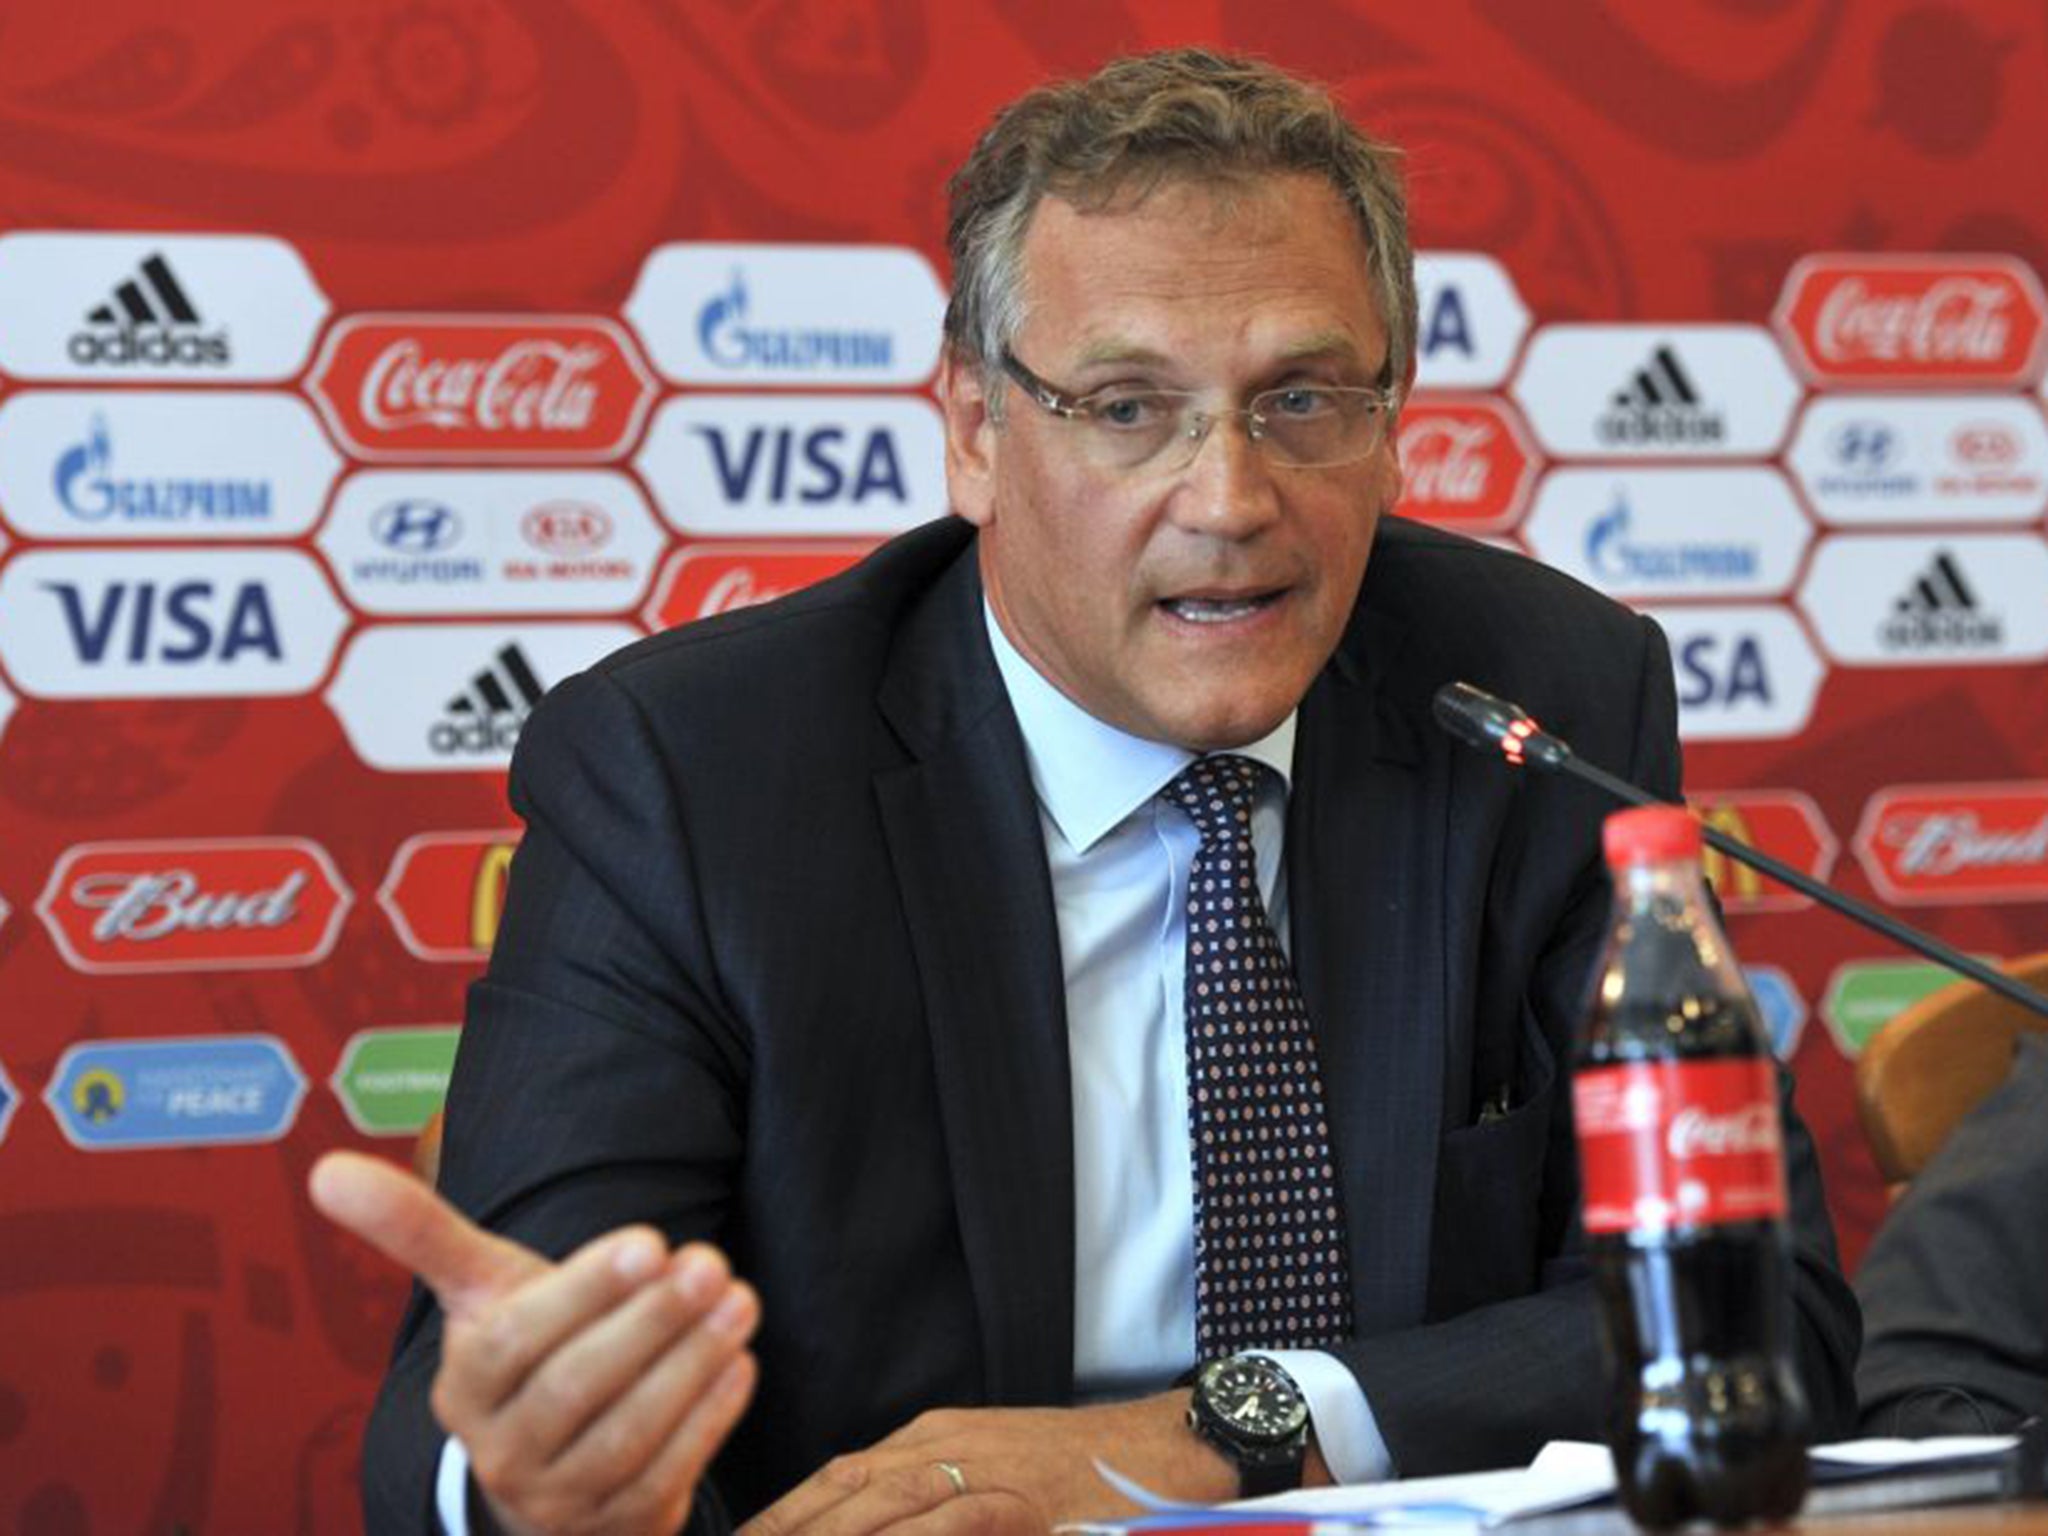 Jérôme Valcke, Blatter’s deputy, is alleged to have authorised a $10m bribe to Fifa’s Jack Warner